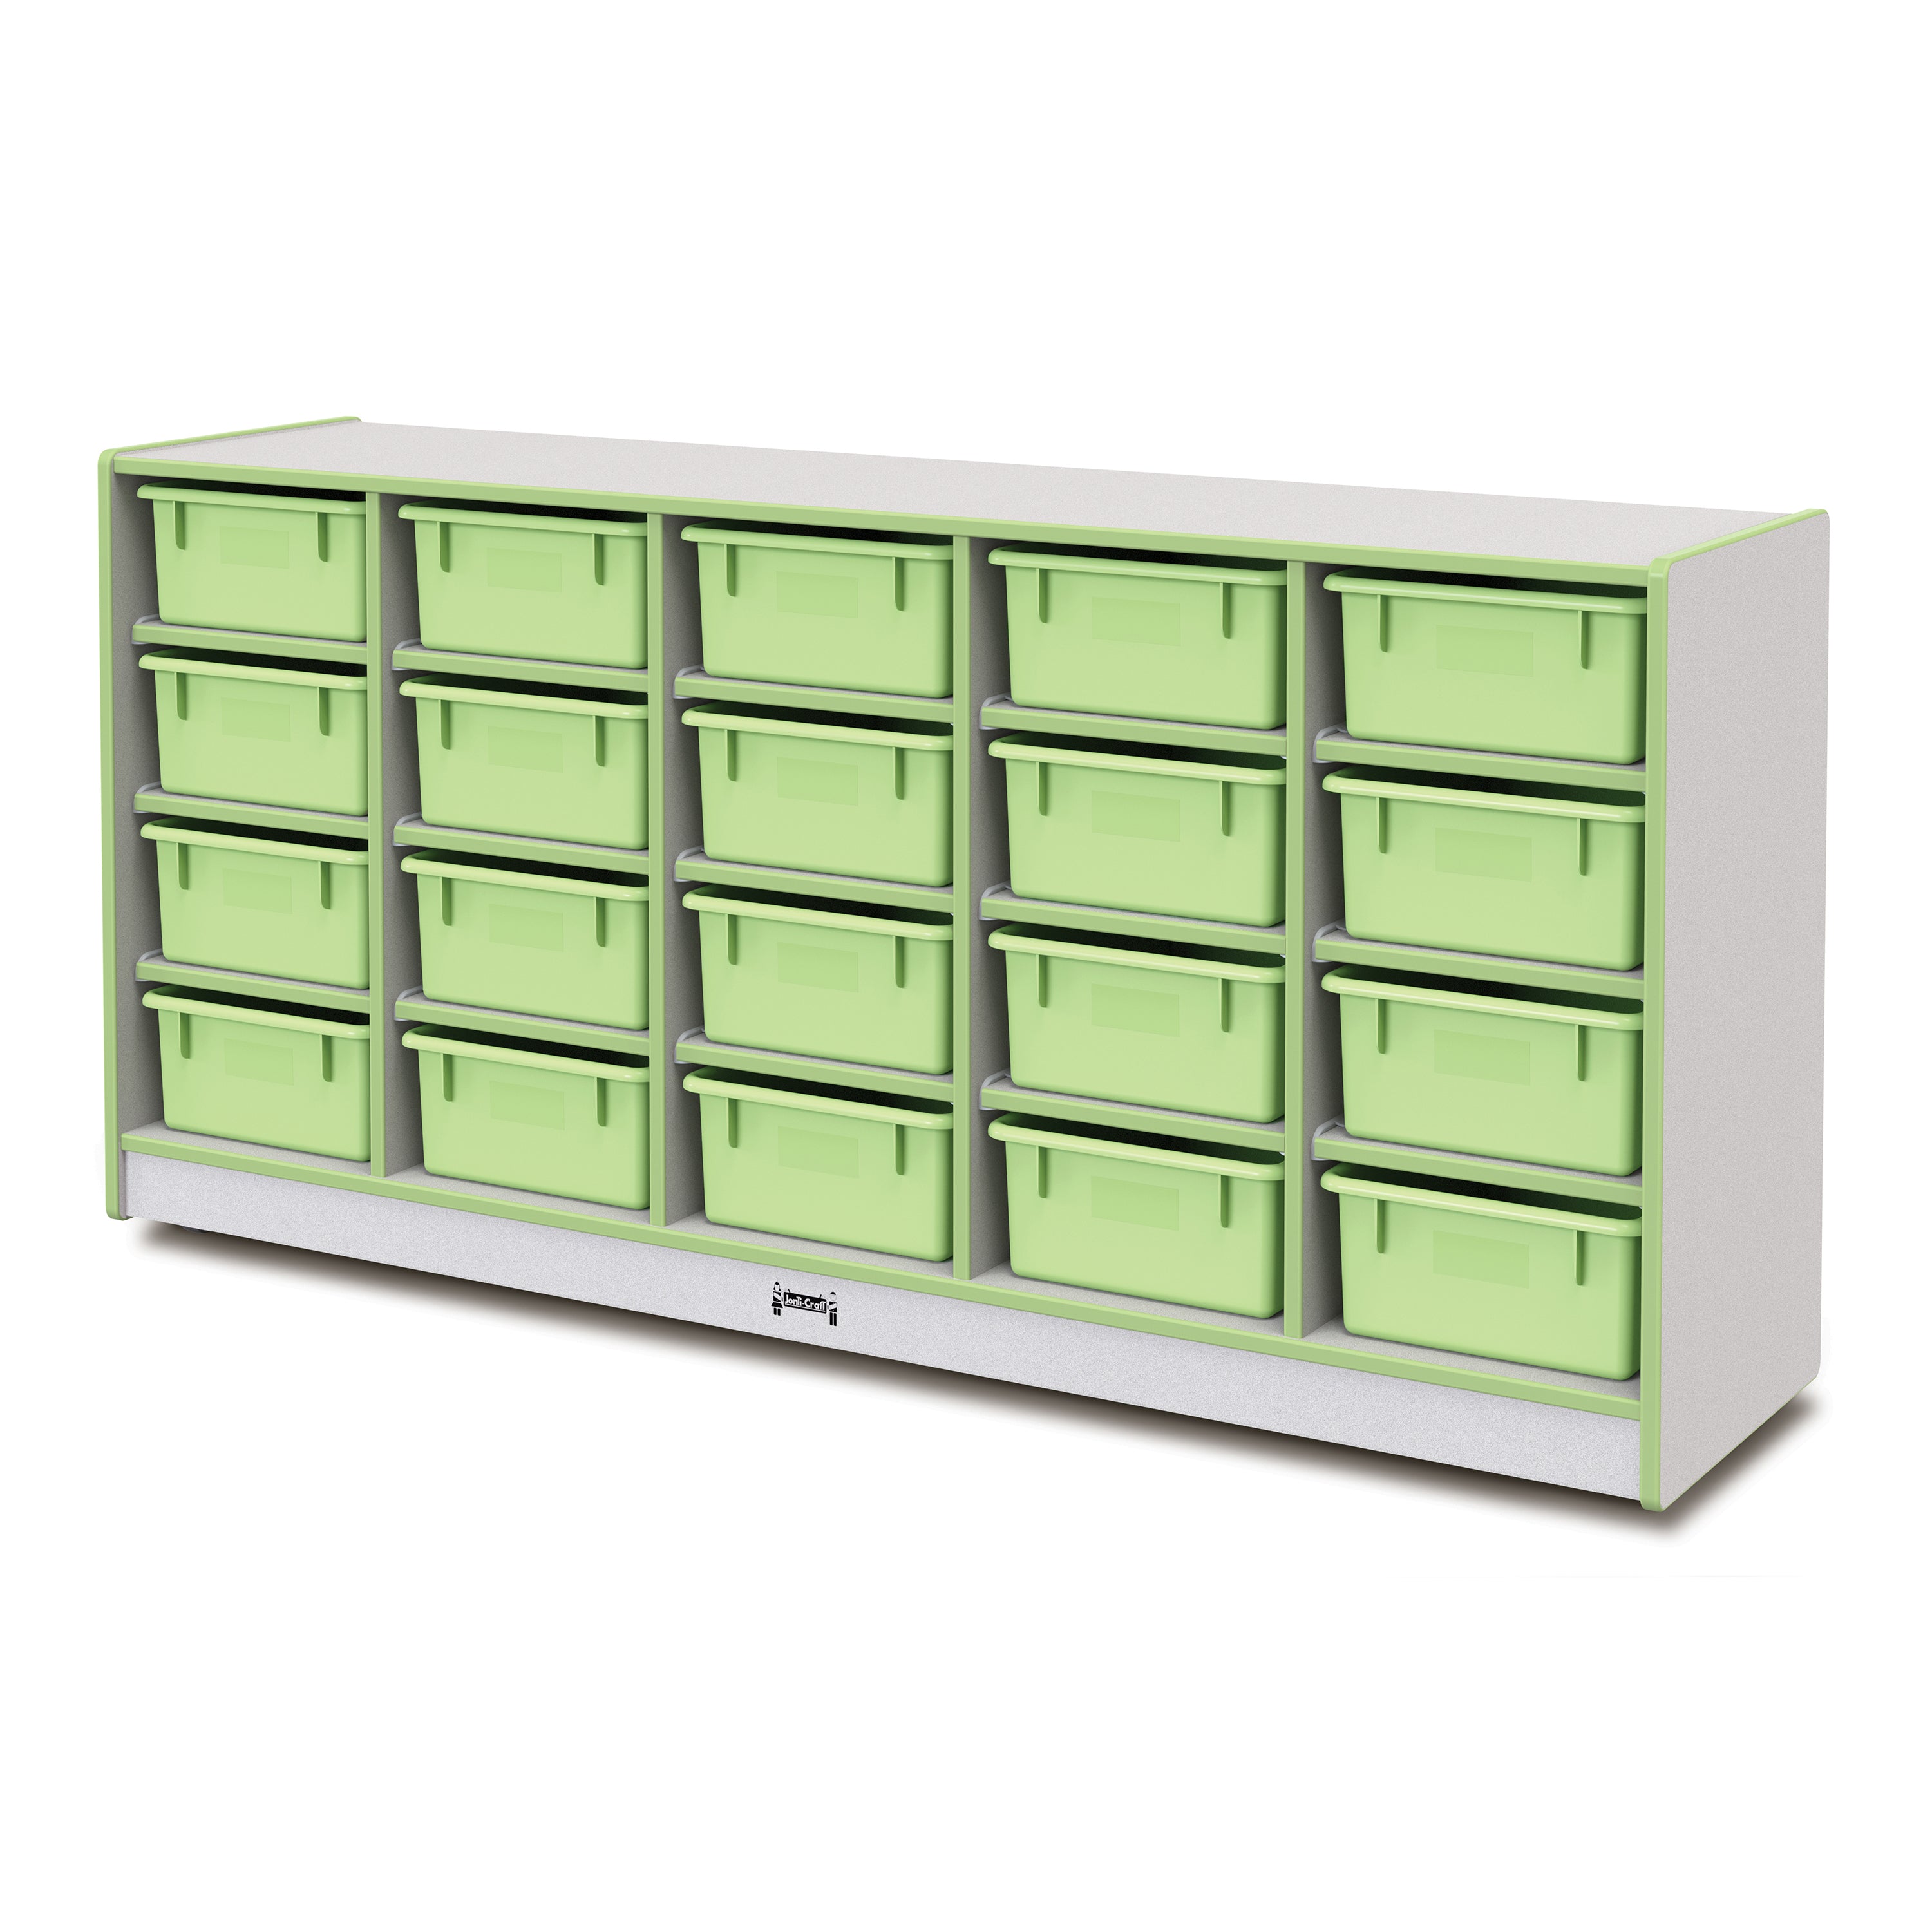 4021JCWW130, Rainbow Accents 20 Tub Mobile Storage - with Tubs - Key Lime Green